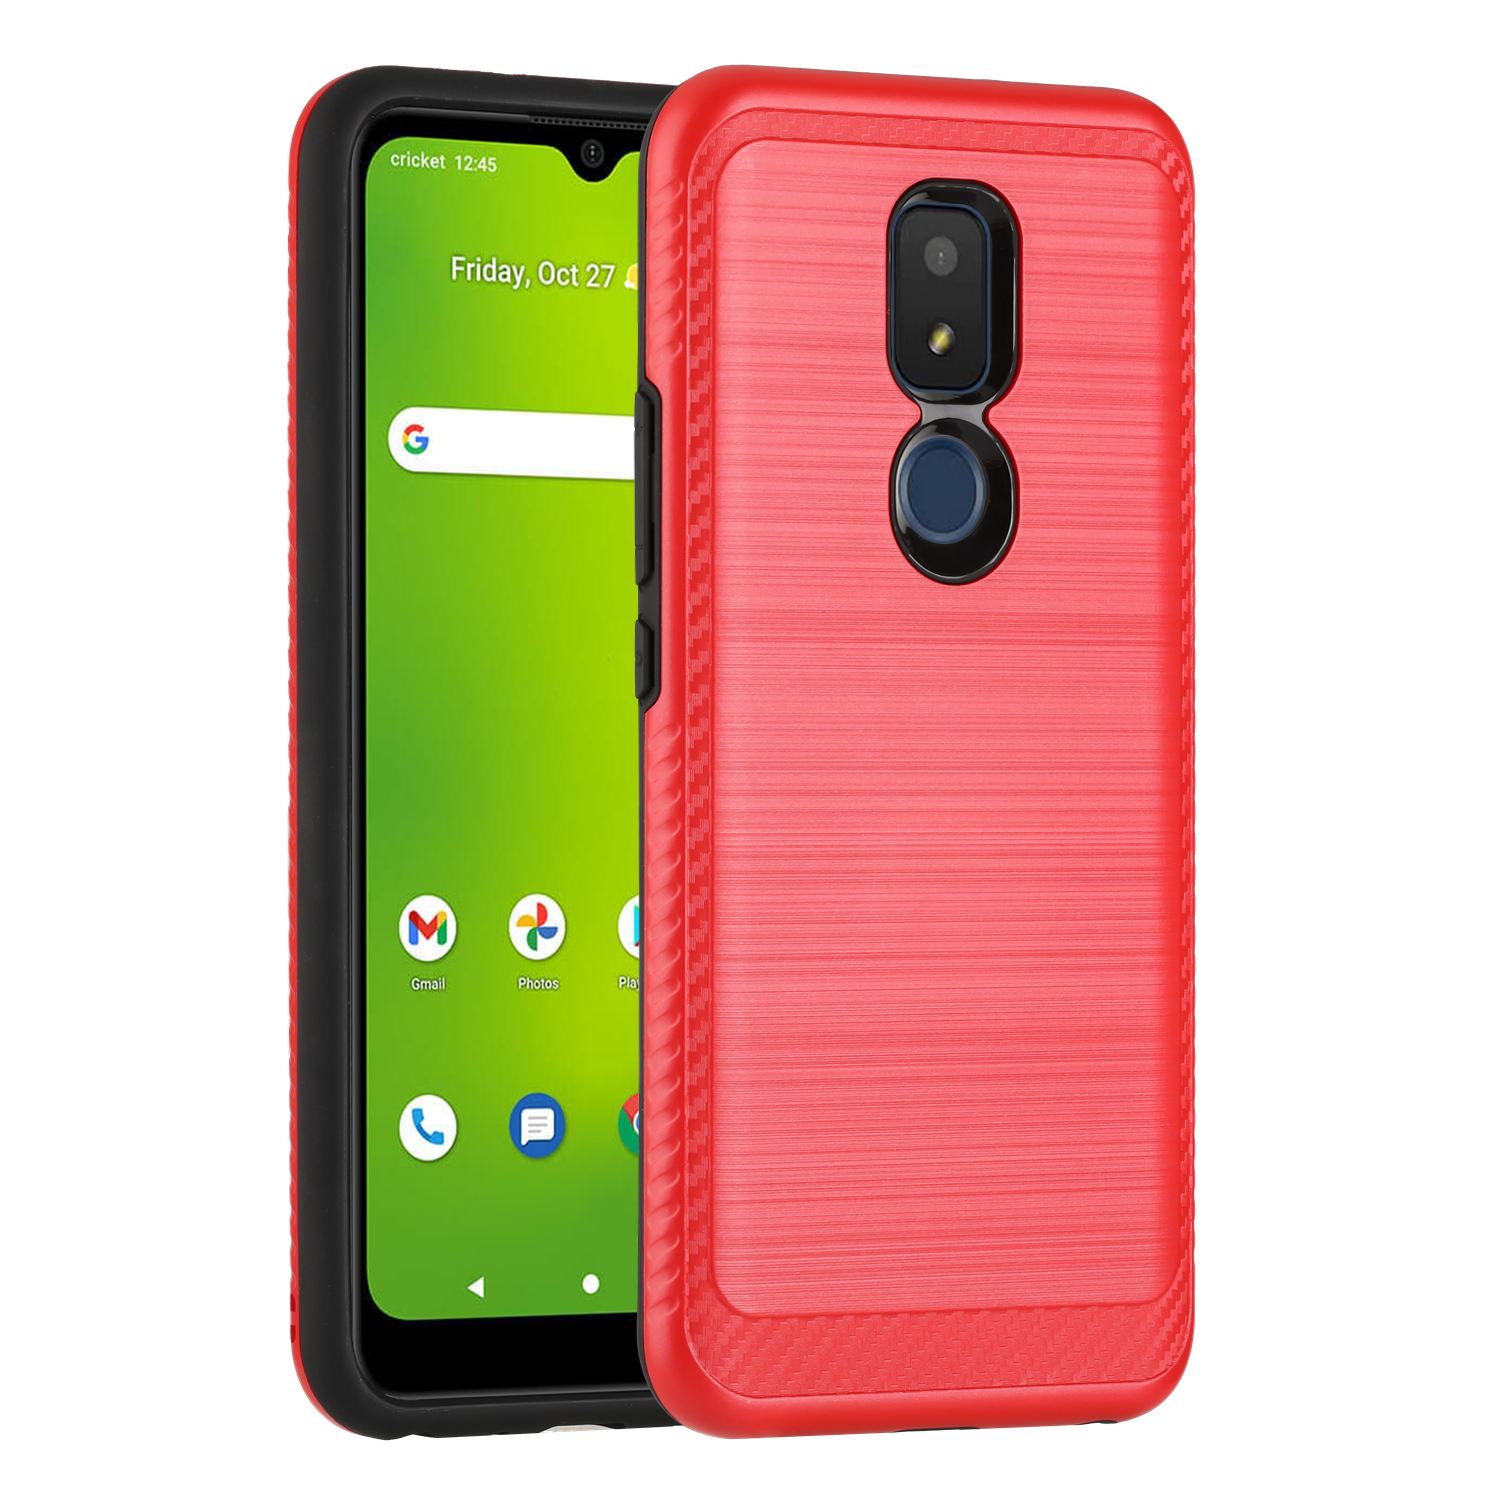 Dual Layer Protective Armor Case for Cricket Icon 3 / AT&T Motivate 2 (Red)